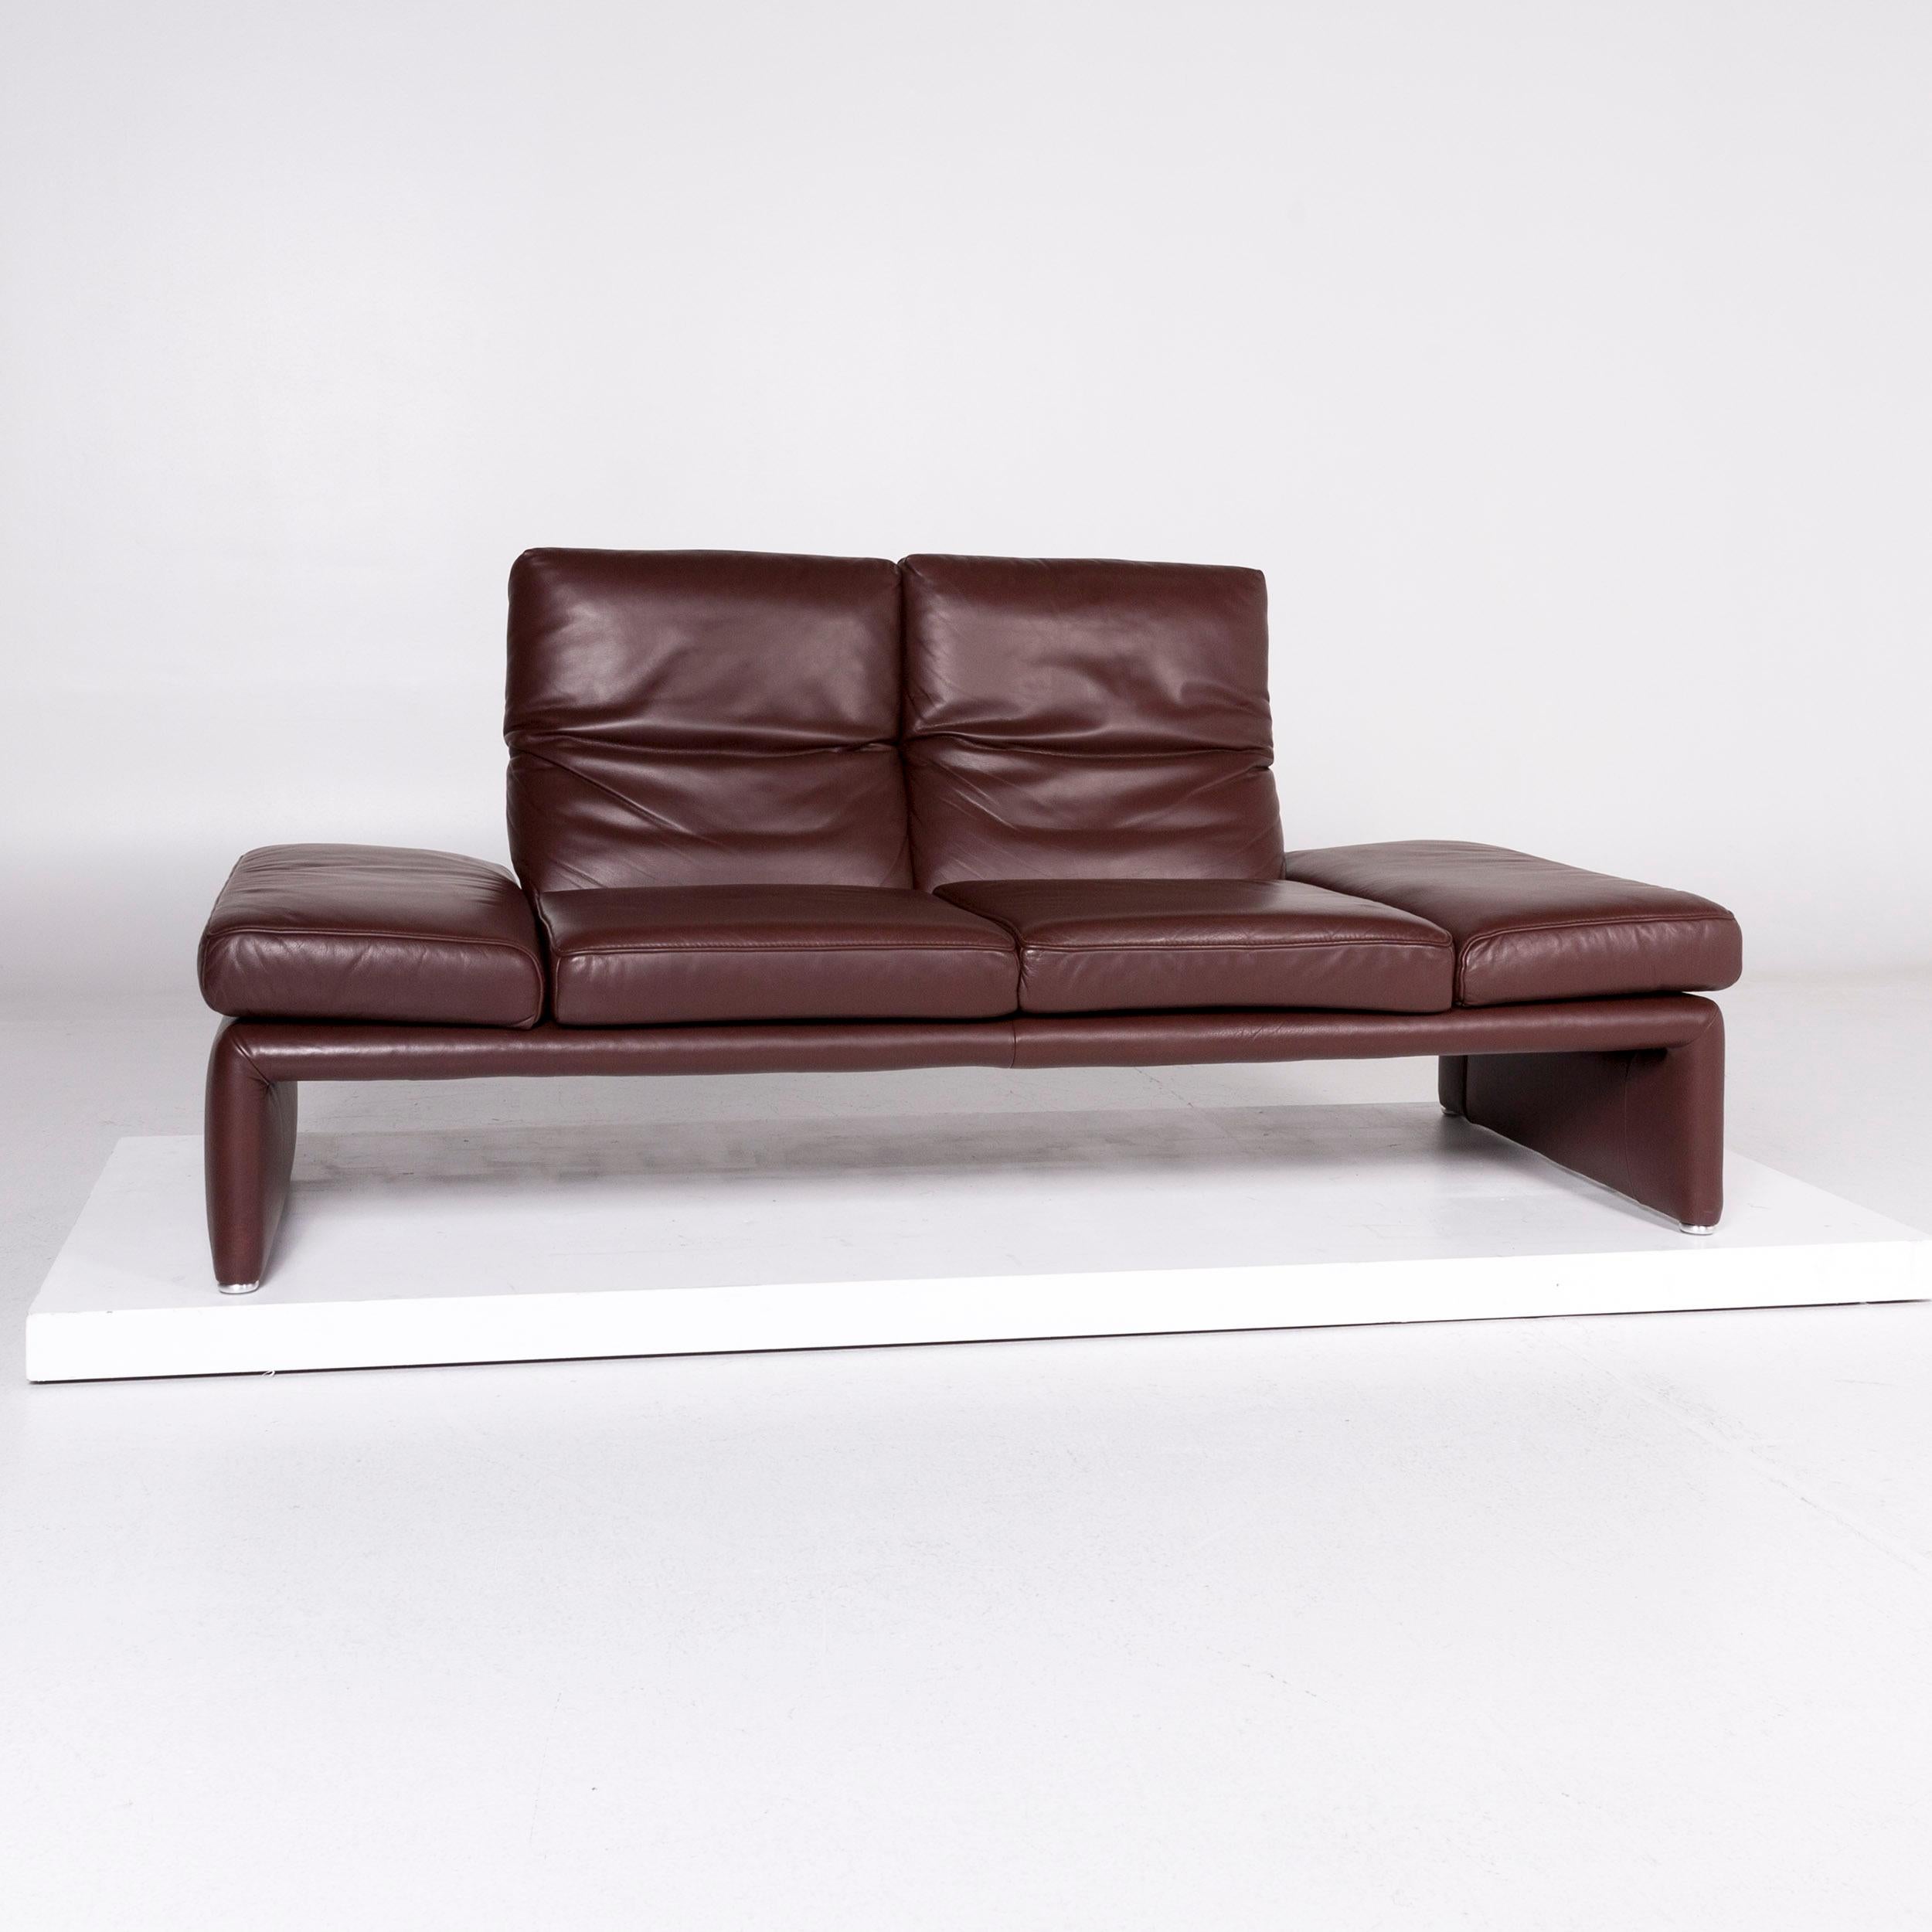 We bring to you a Koinor Raoul leather sofa brown red brown two-seat function.

 Product measurements in centimeters:
 
Depth 88
Width 203
Height 97
Seat-height 46
Rest-height 44
Seat-depth 53
Seat-width 122.

 